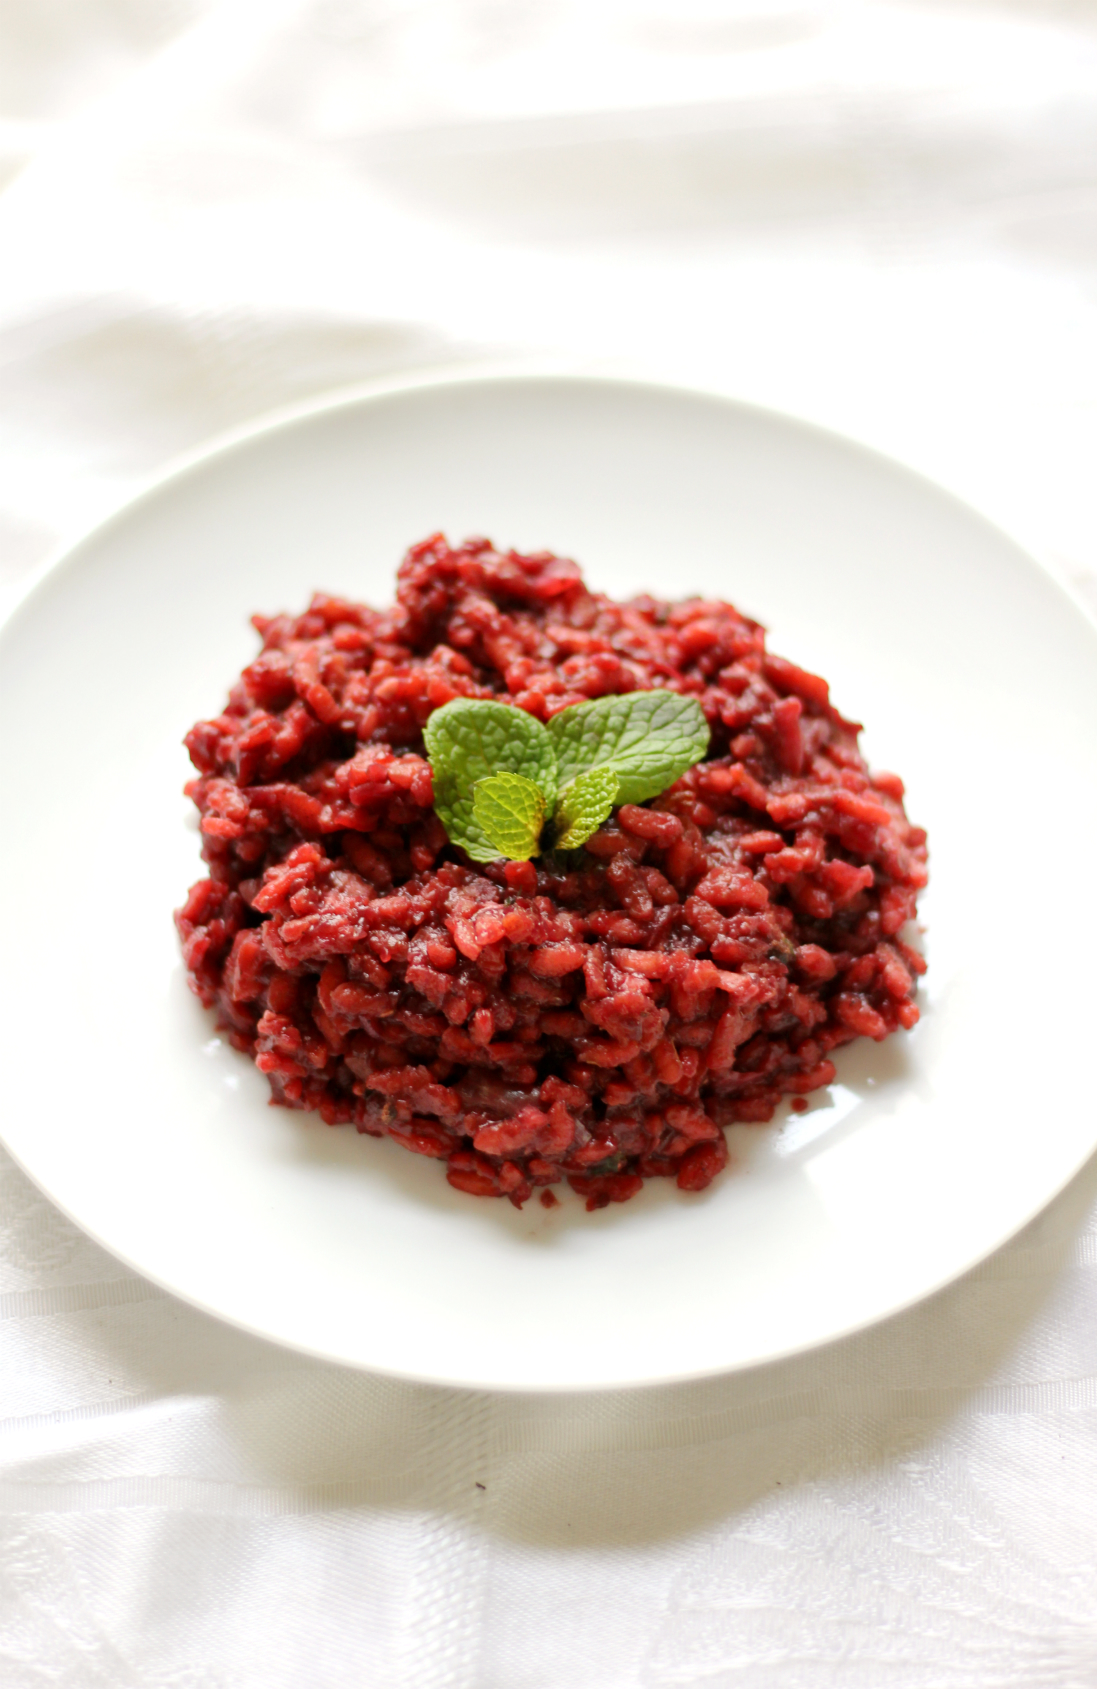 Beetroot Risotto | Strength and Sunshine @RebeccaGF666 Ultra creamy vegan and gluten-free beetroot risotto. A delicious and beautiful side dish done in 30 minutes. This healthy risotto recipe will have you winning dinnertime! [ad]